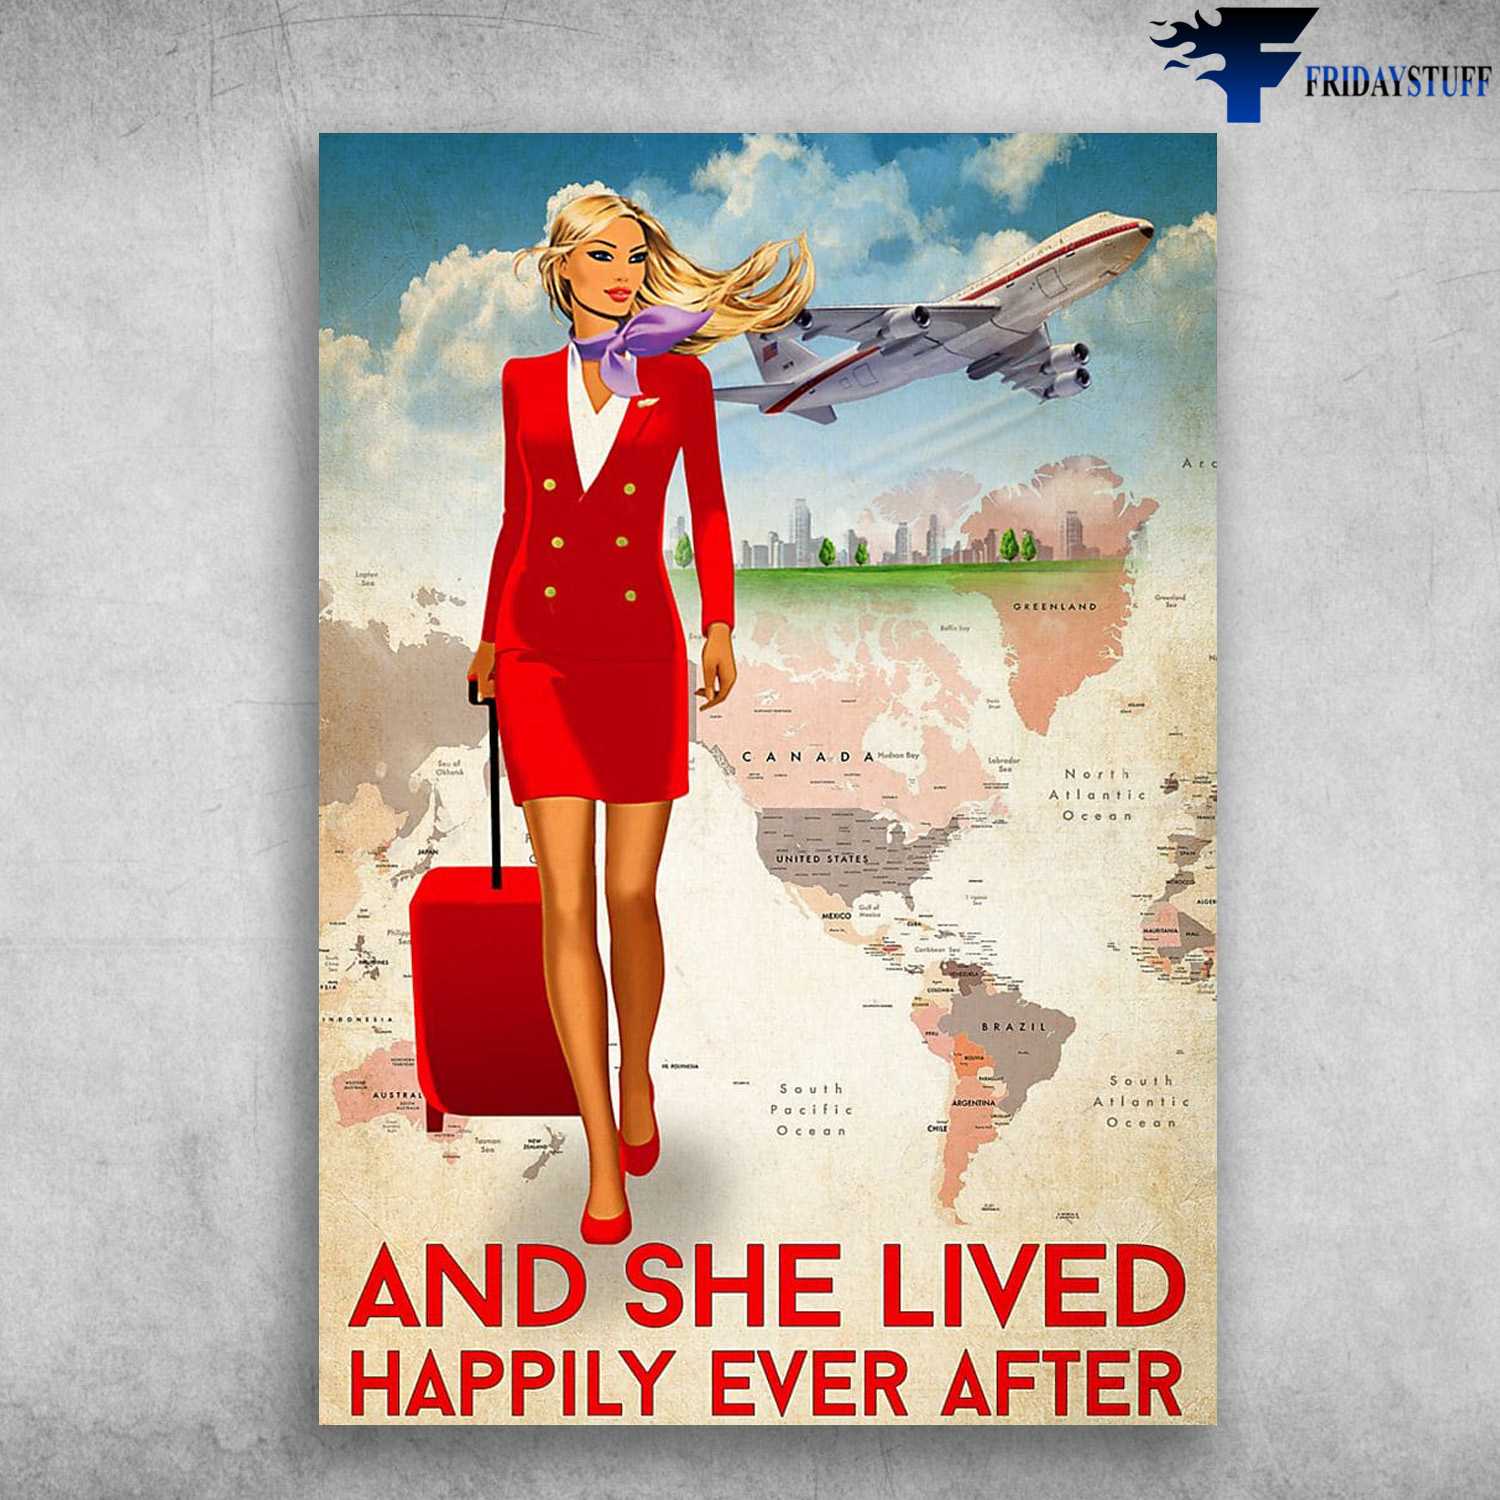 Flight Attendant, Lady Girl Poster, And She Lived, Happily Ever After